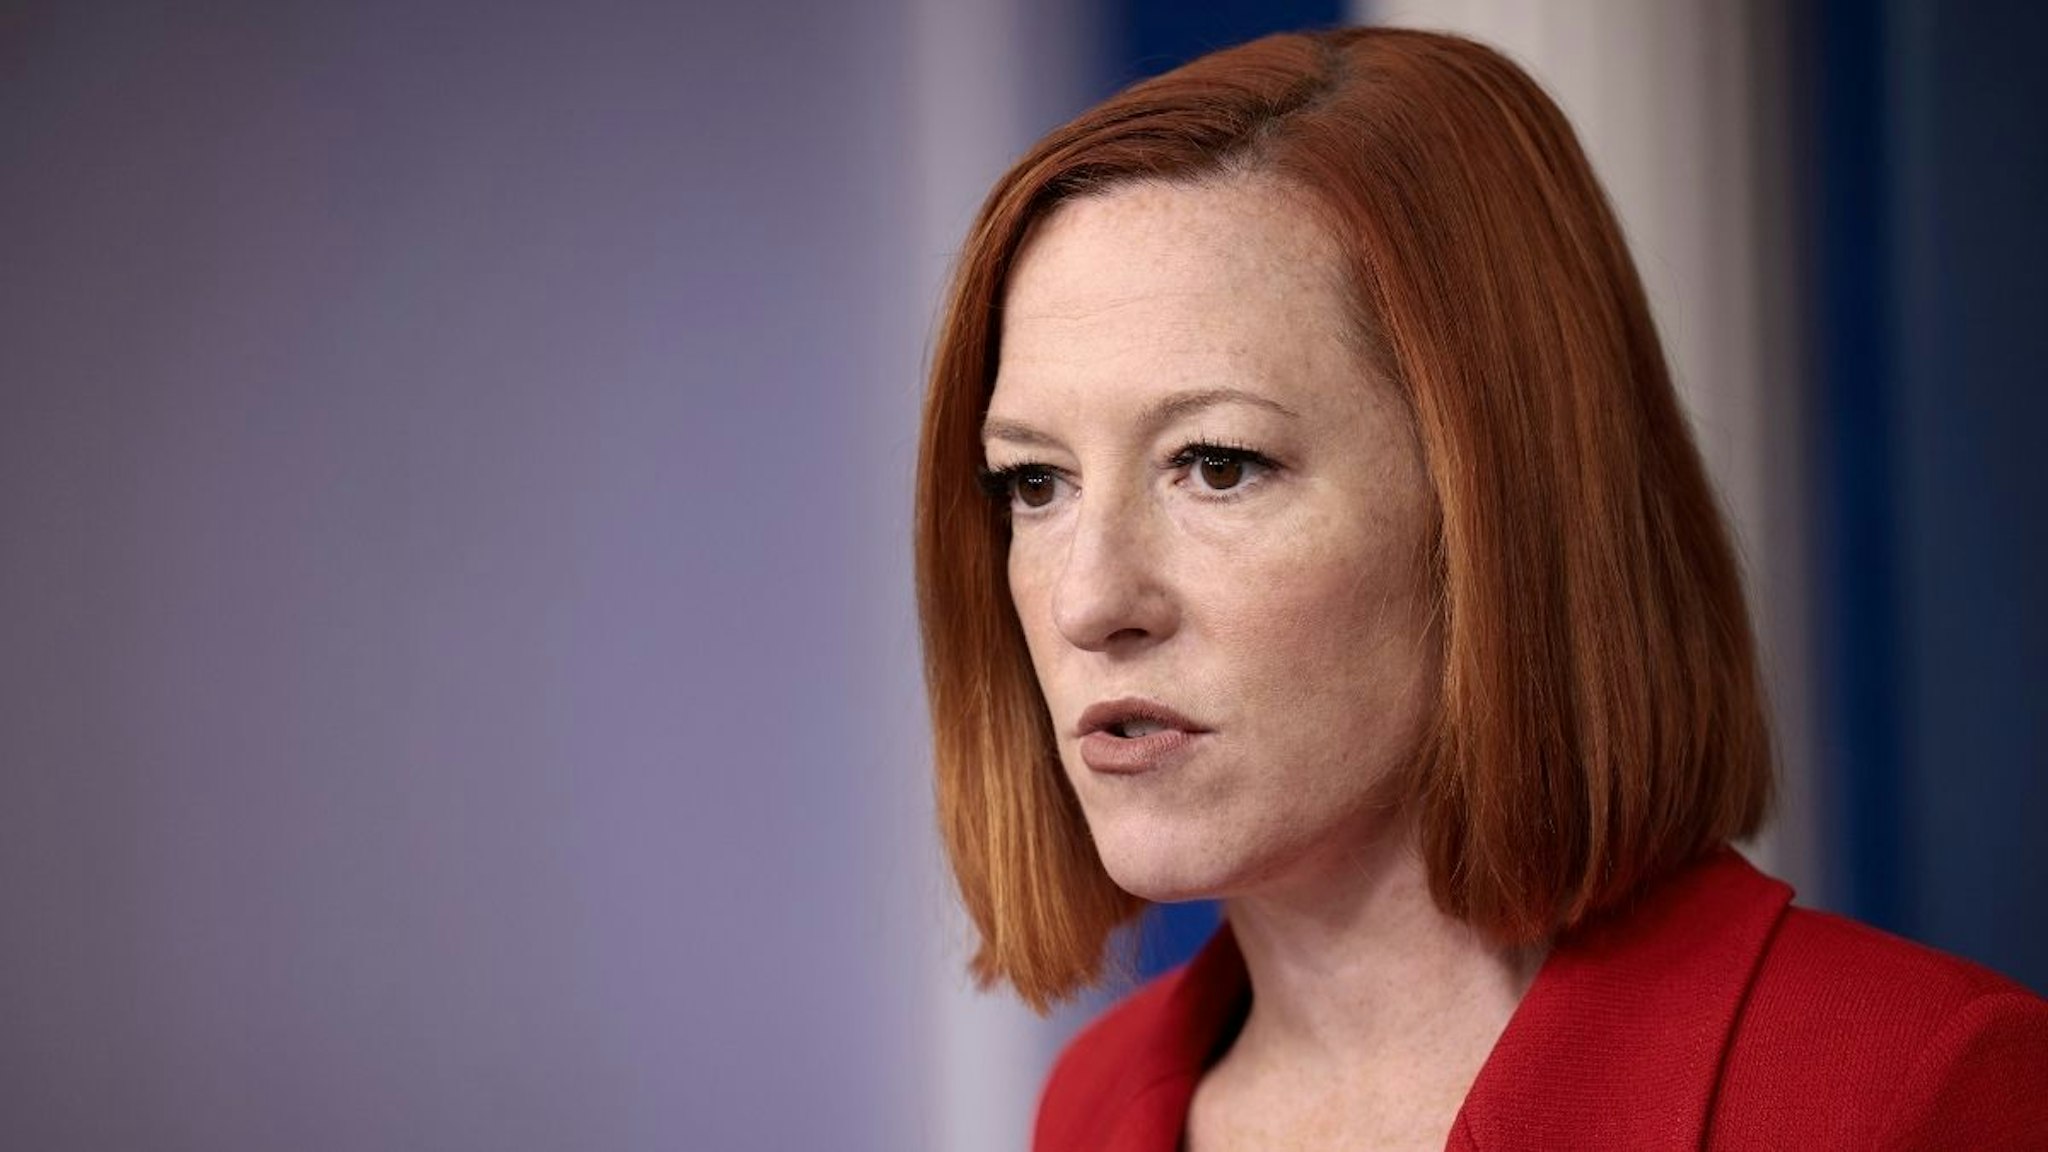 White House Press Secretary Jen Psaki speaks during a daily news briefing at the James S. Brady Press Briefing Room of the White House on December 02, 2021 in Washington, DC.